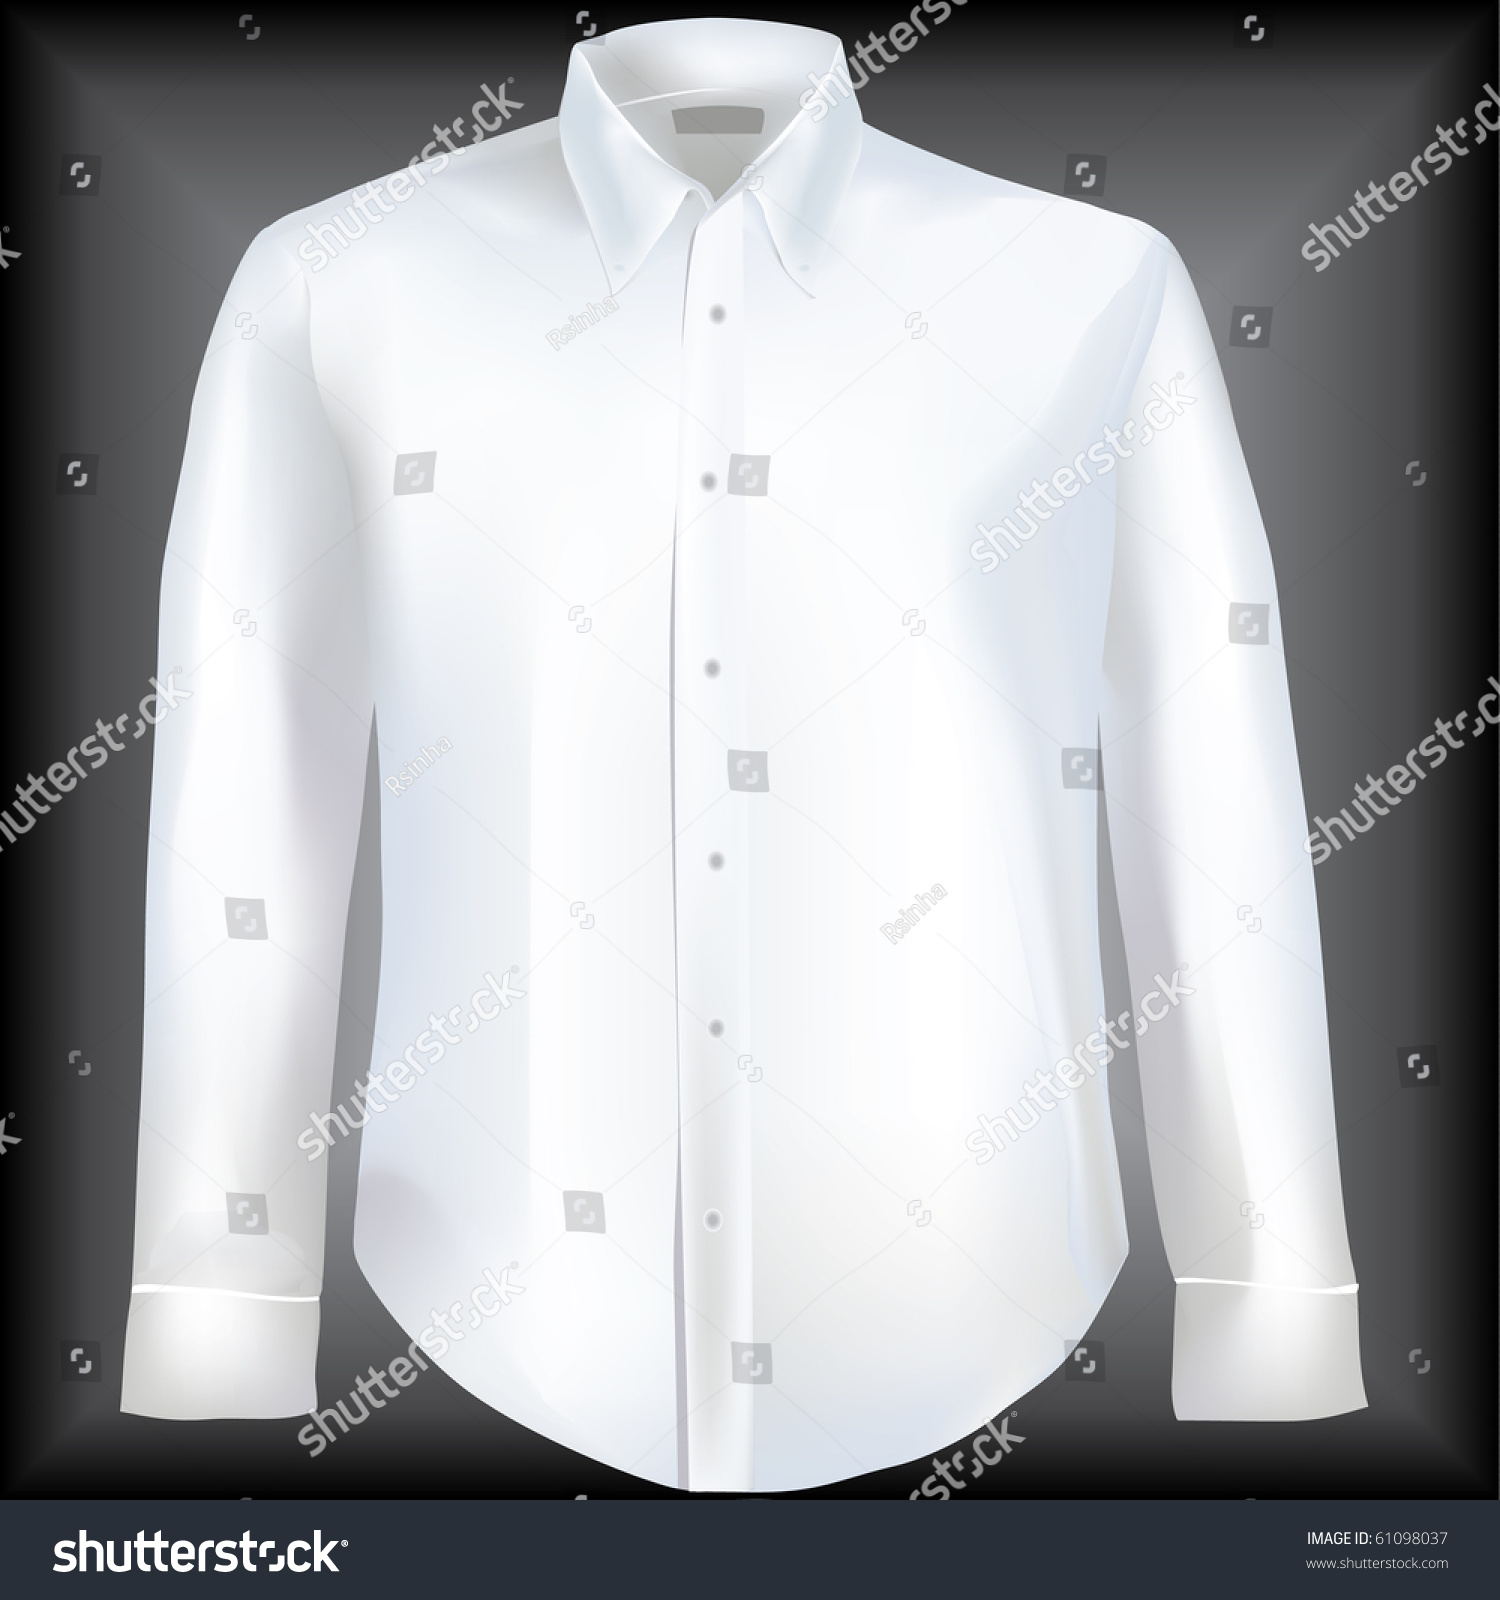 Formal Shirt With Button Down Collar And Long Sleeves Stock Vector ...